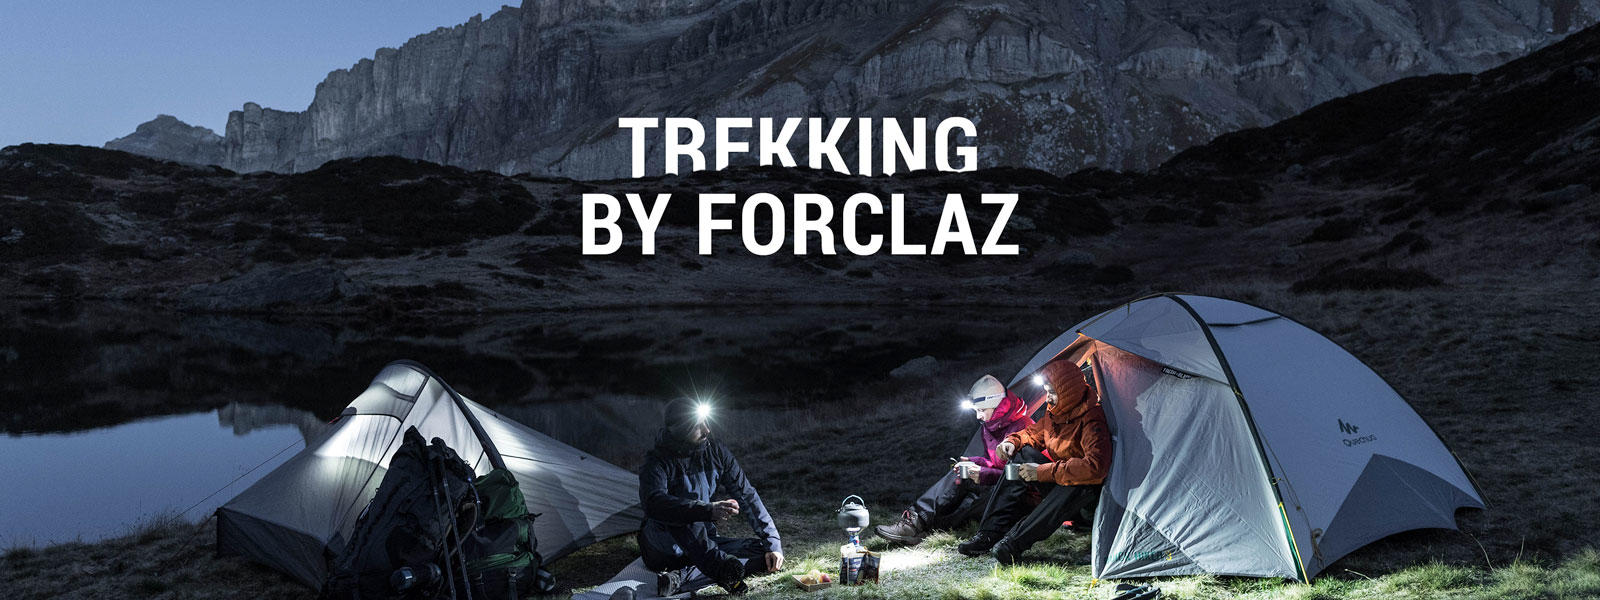 The trekking by Forclaz